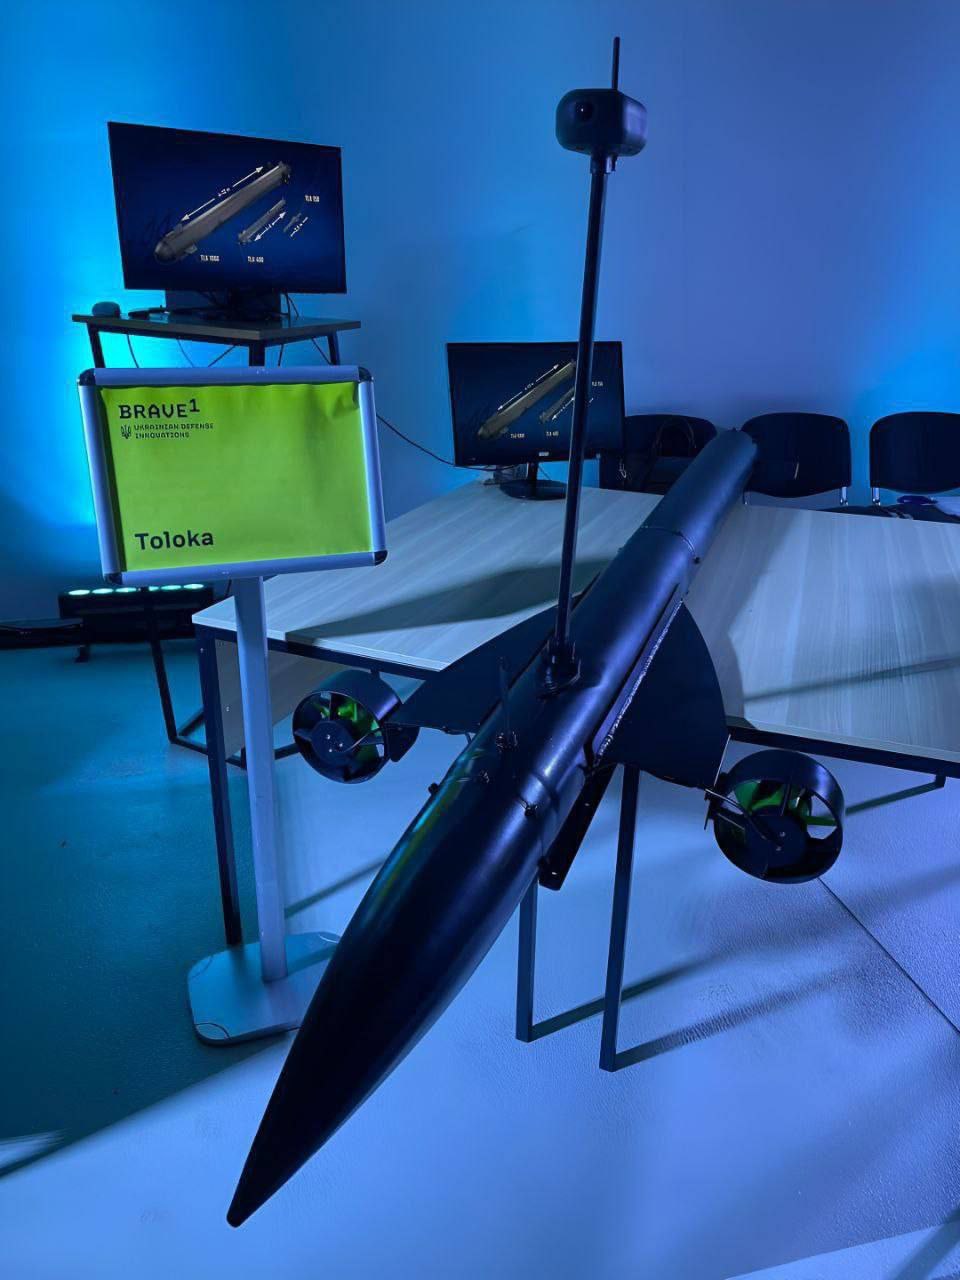 Ukrainian the Toloka UUV was  presented at the Brave1 exhibition, The Toloka Underwater Maritime Drone Is a New Headache for Russians in the Black Sea, Defense Express